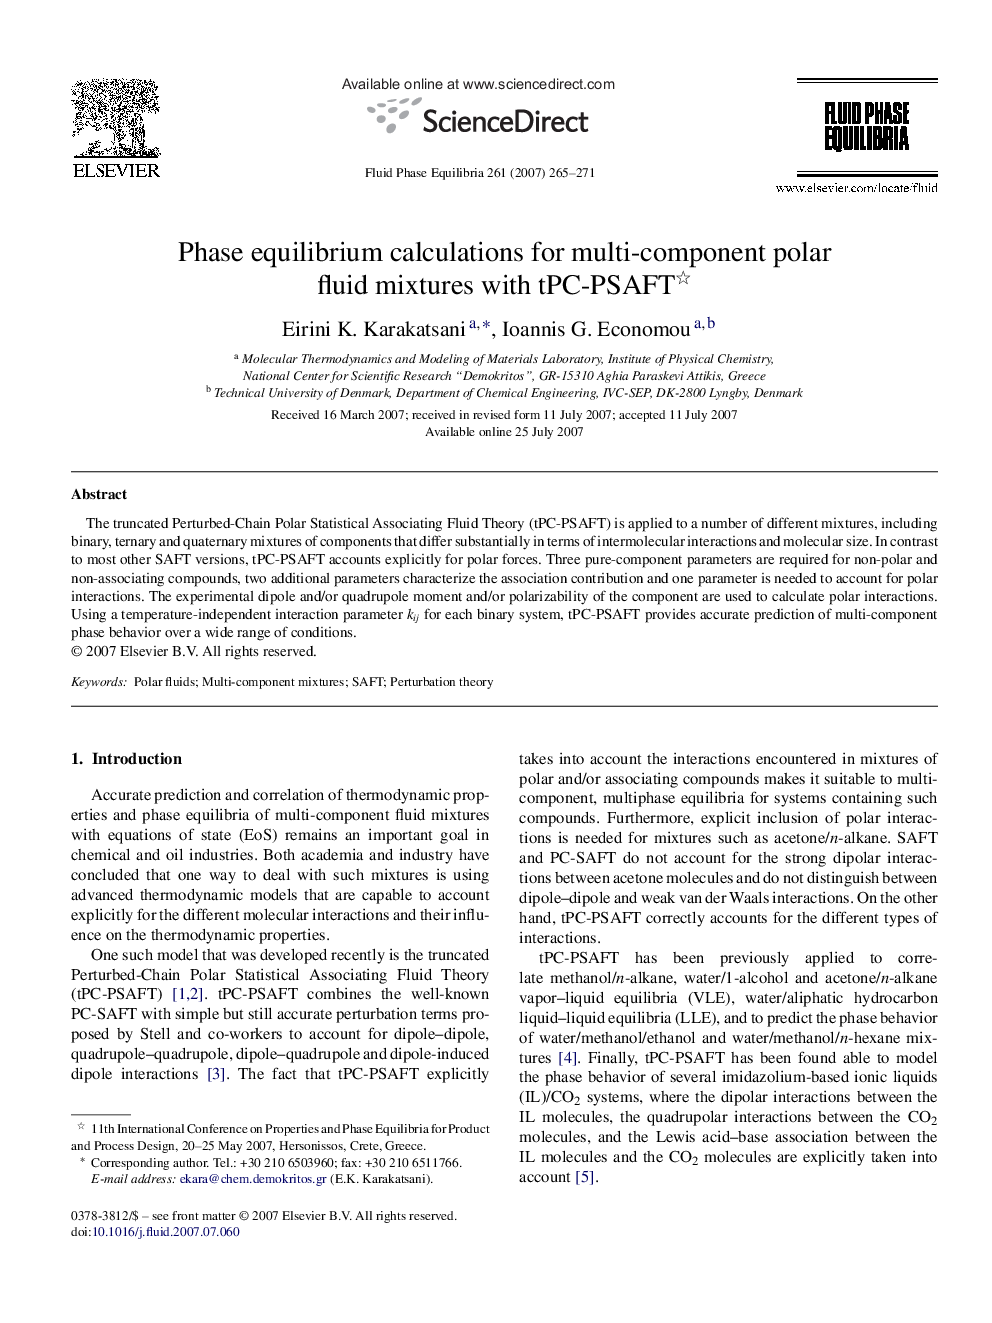 Phase equilibrium calculations for multi-component polar fluid mixtures with tPC-PSAFT 